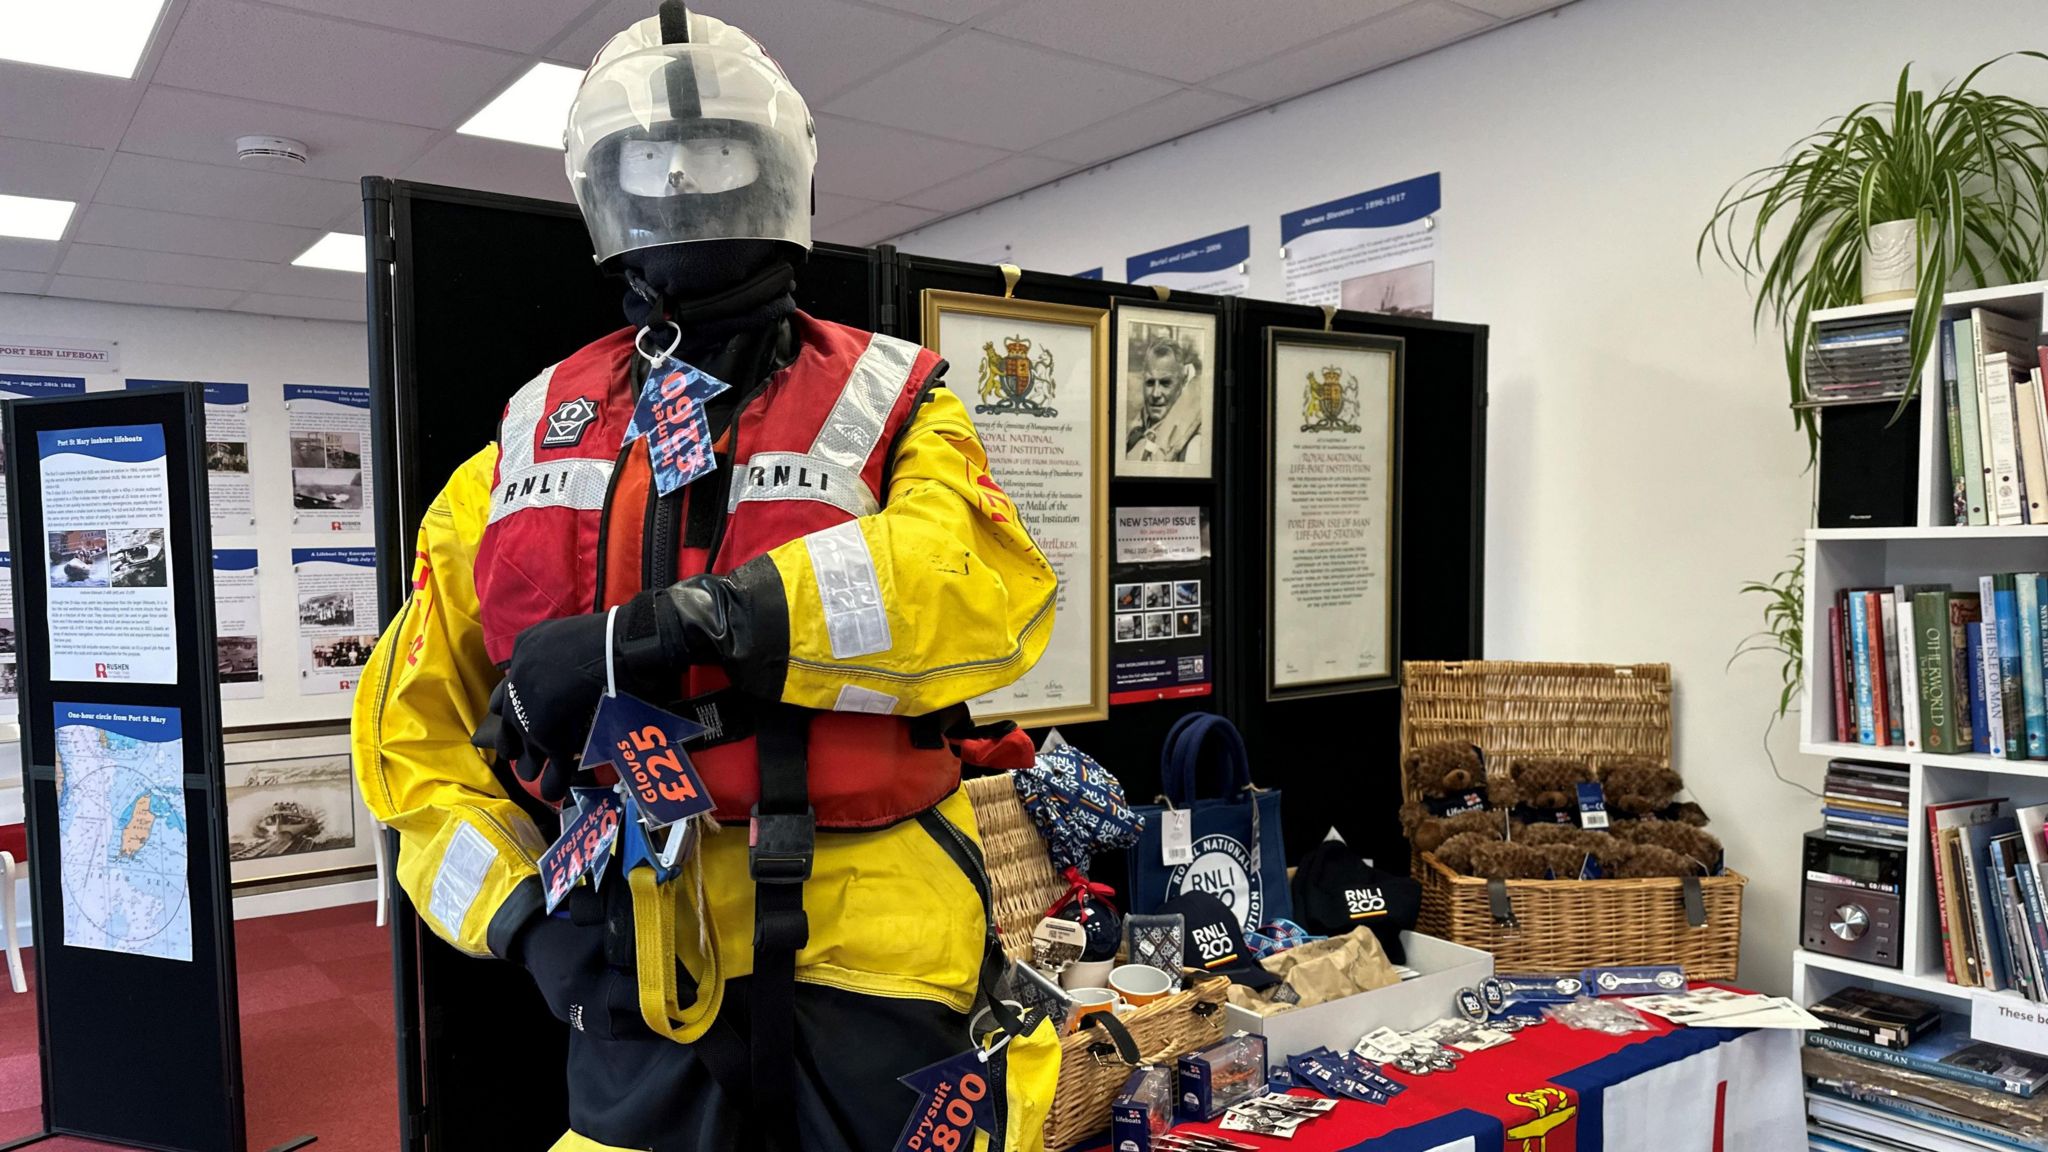 Lifeboat crew gear